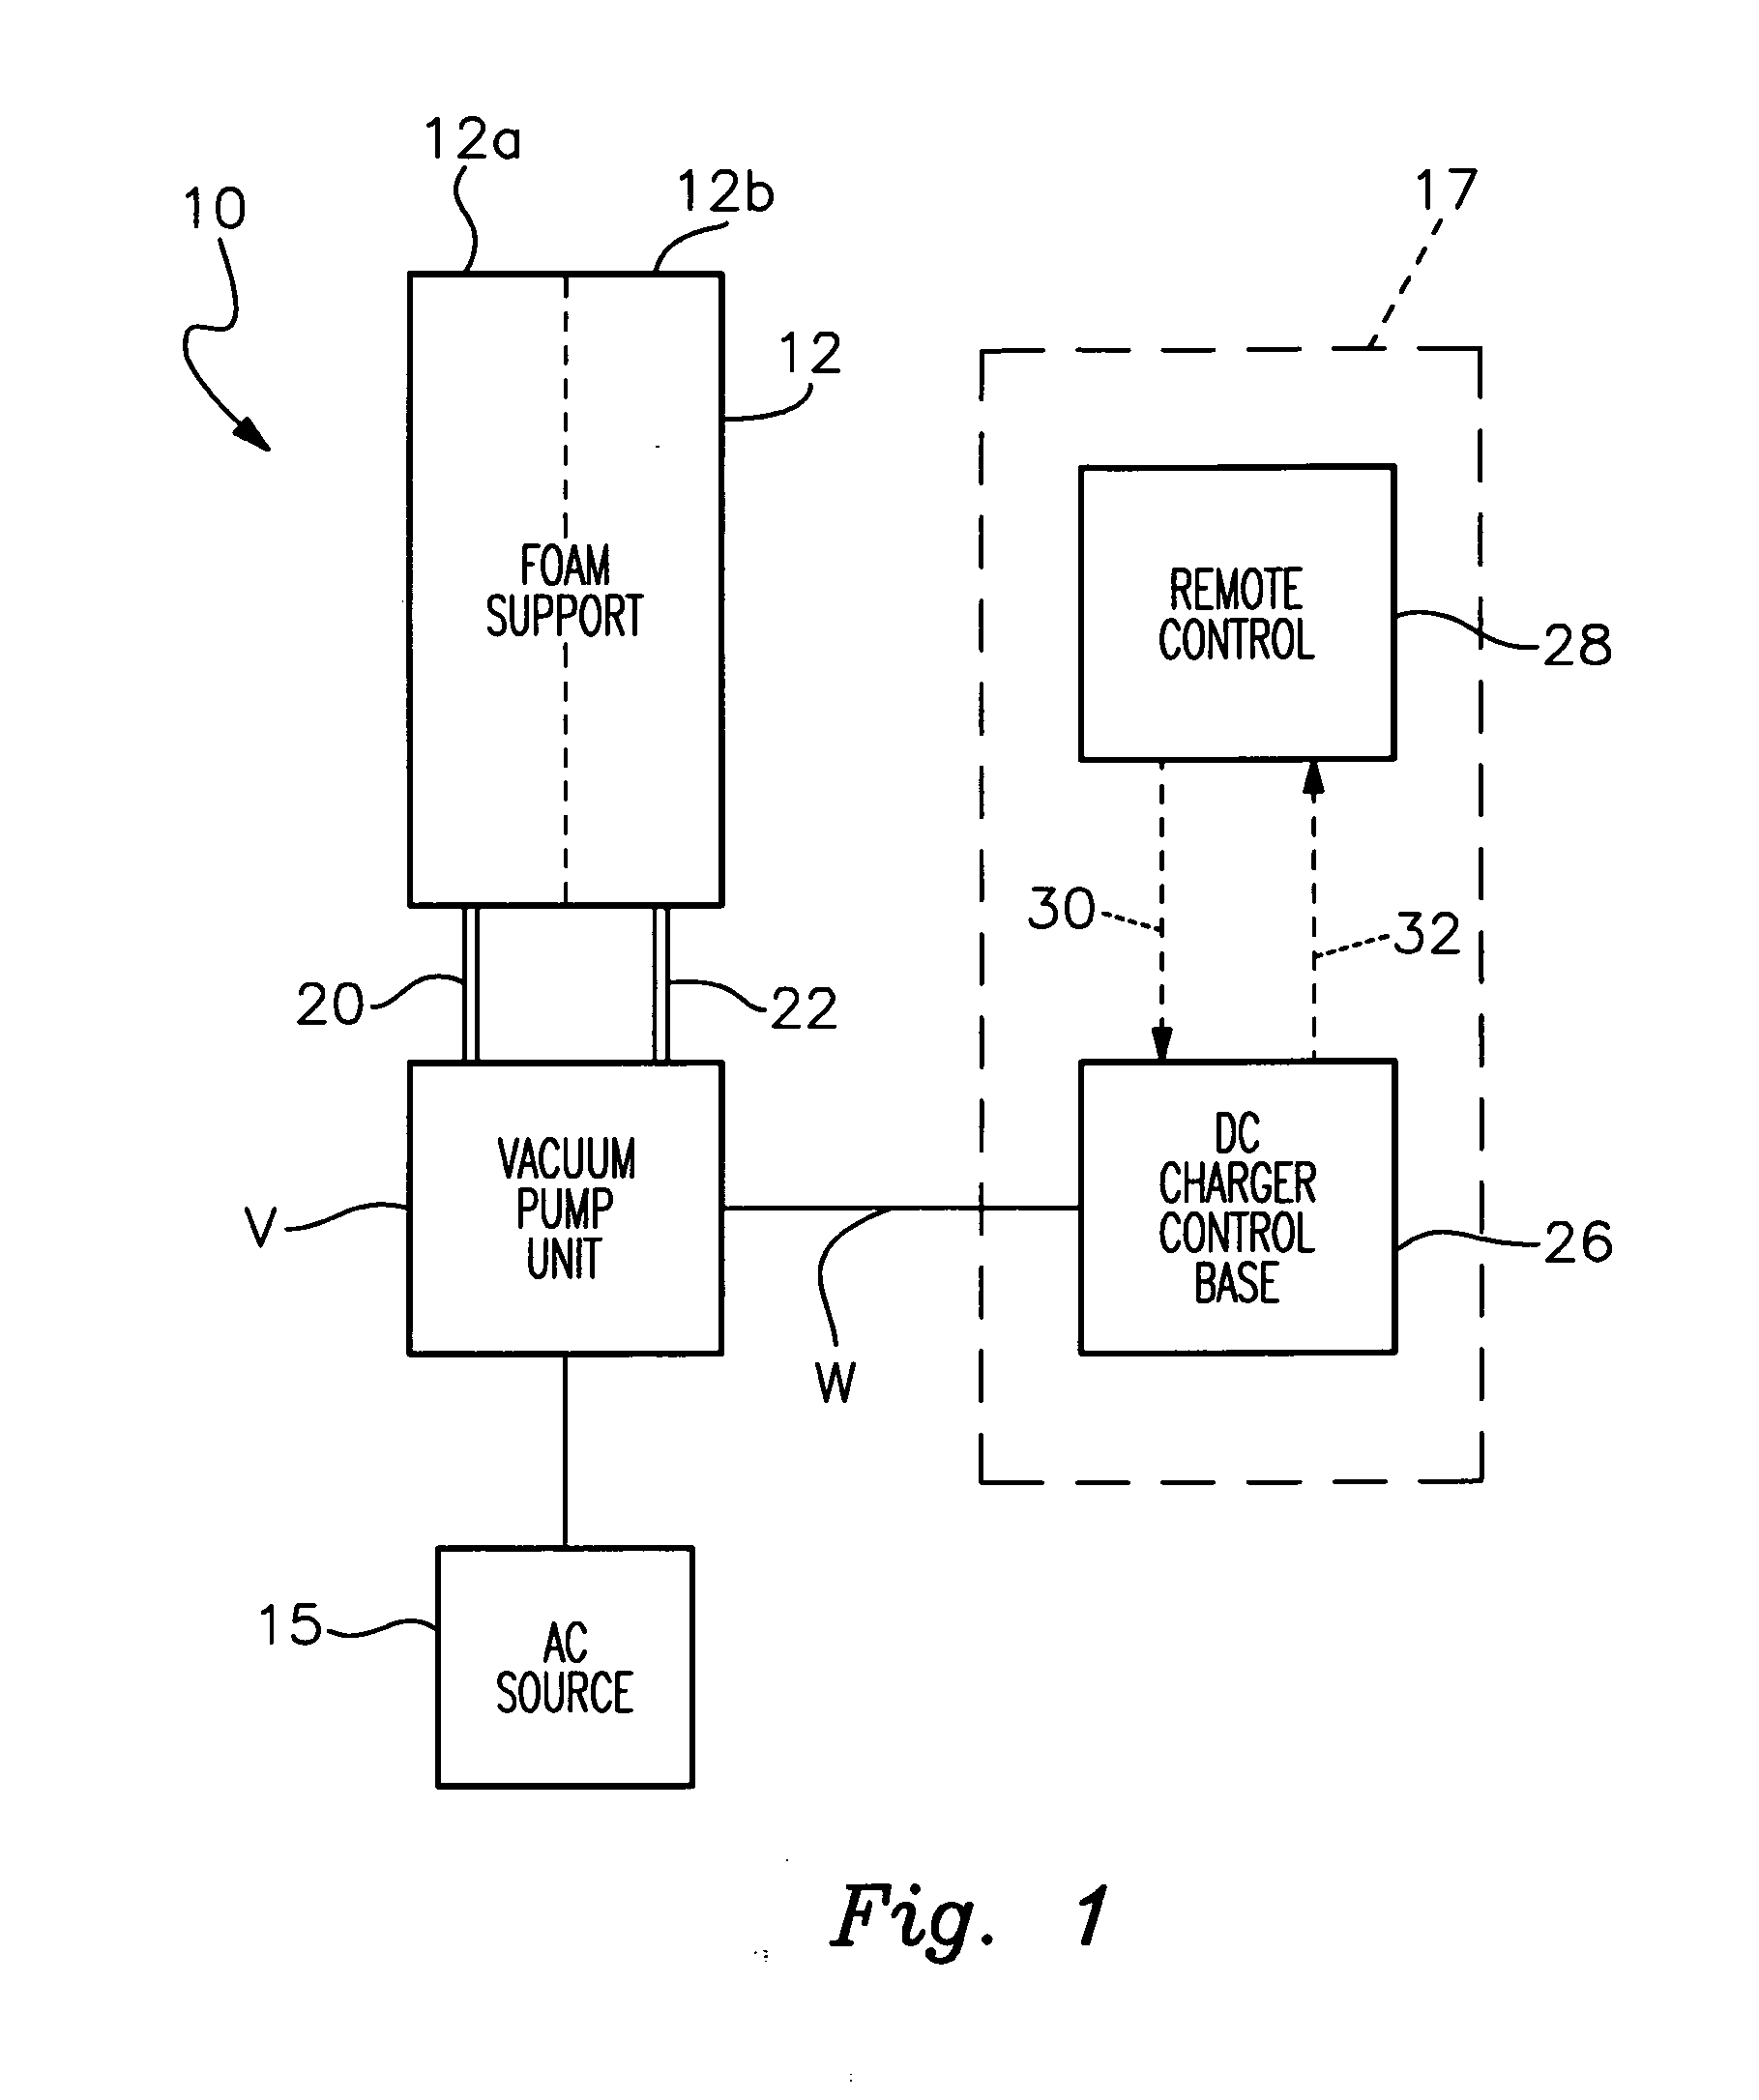 Pressure control and feedback system for an adjustable foam support apparatus